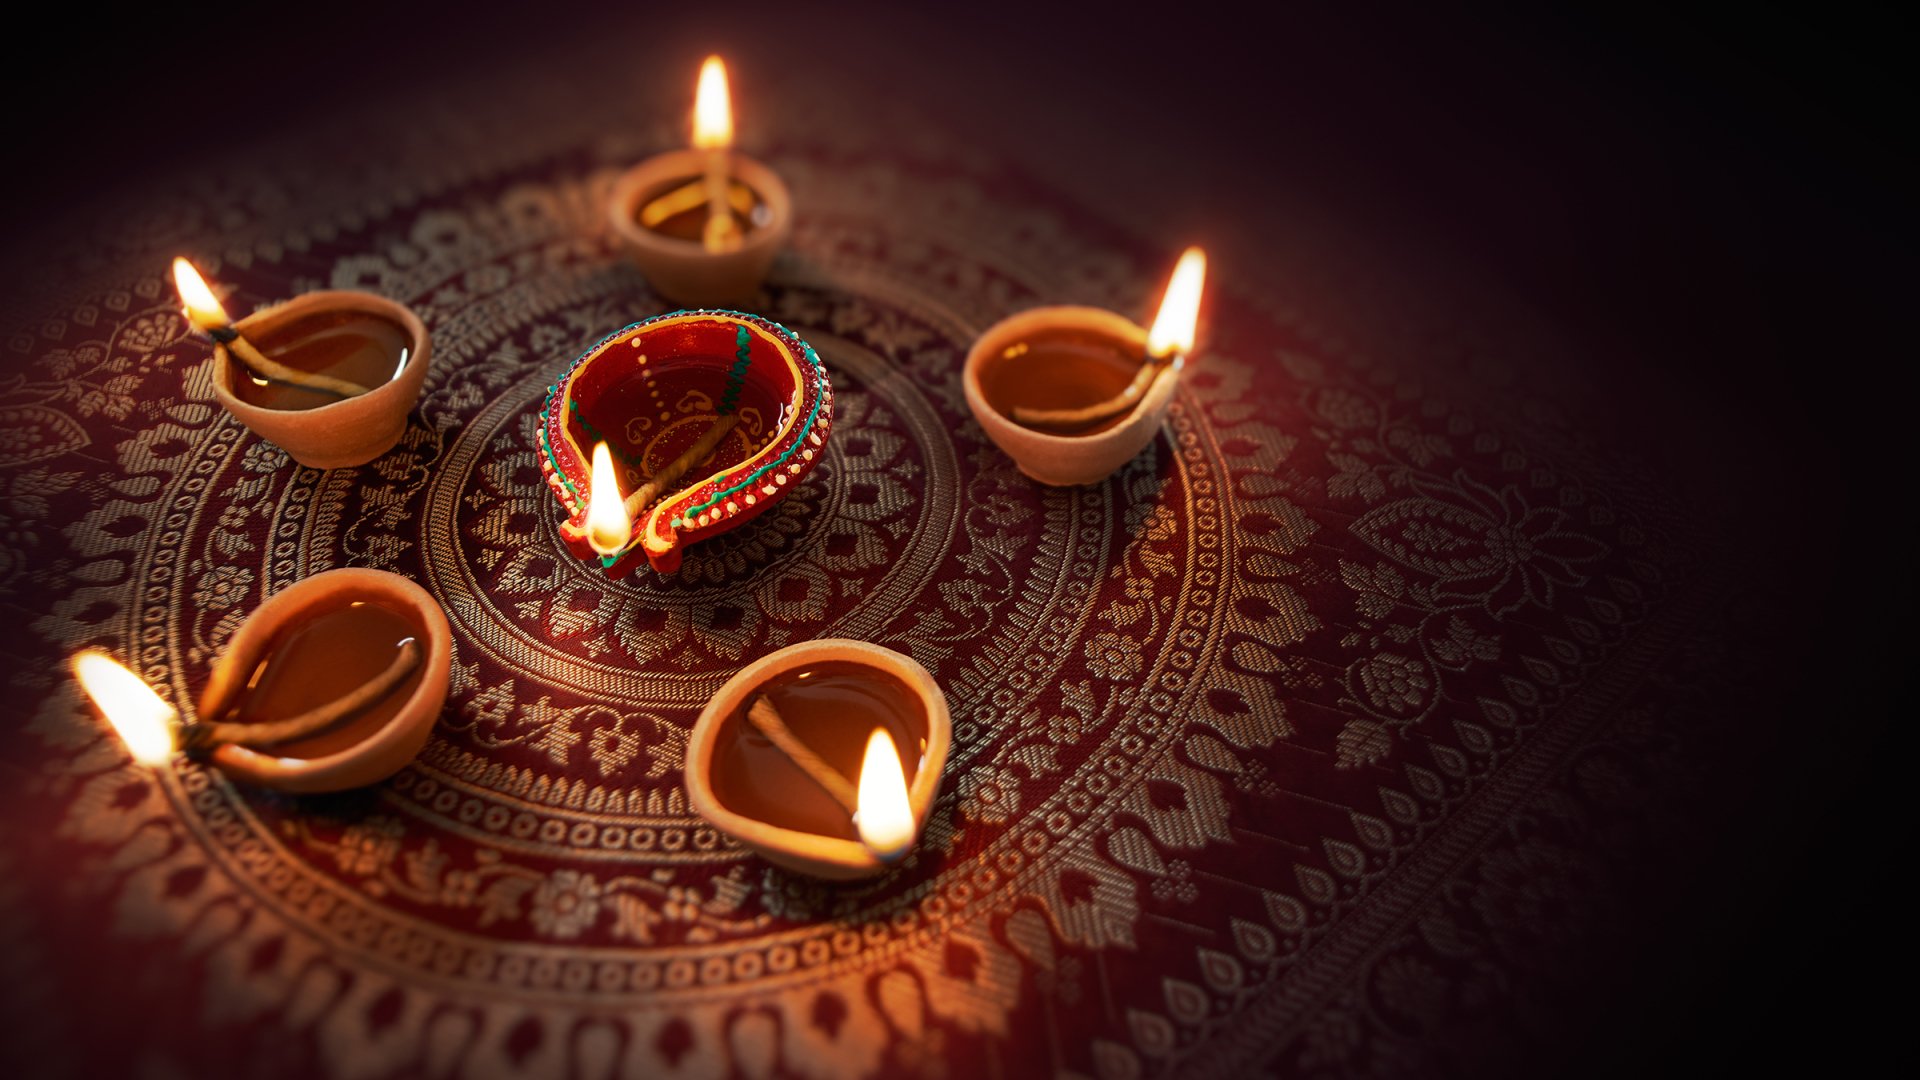 Download Creative diwali wallpaper  Diwali wallpapers for your mobile cell  phone